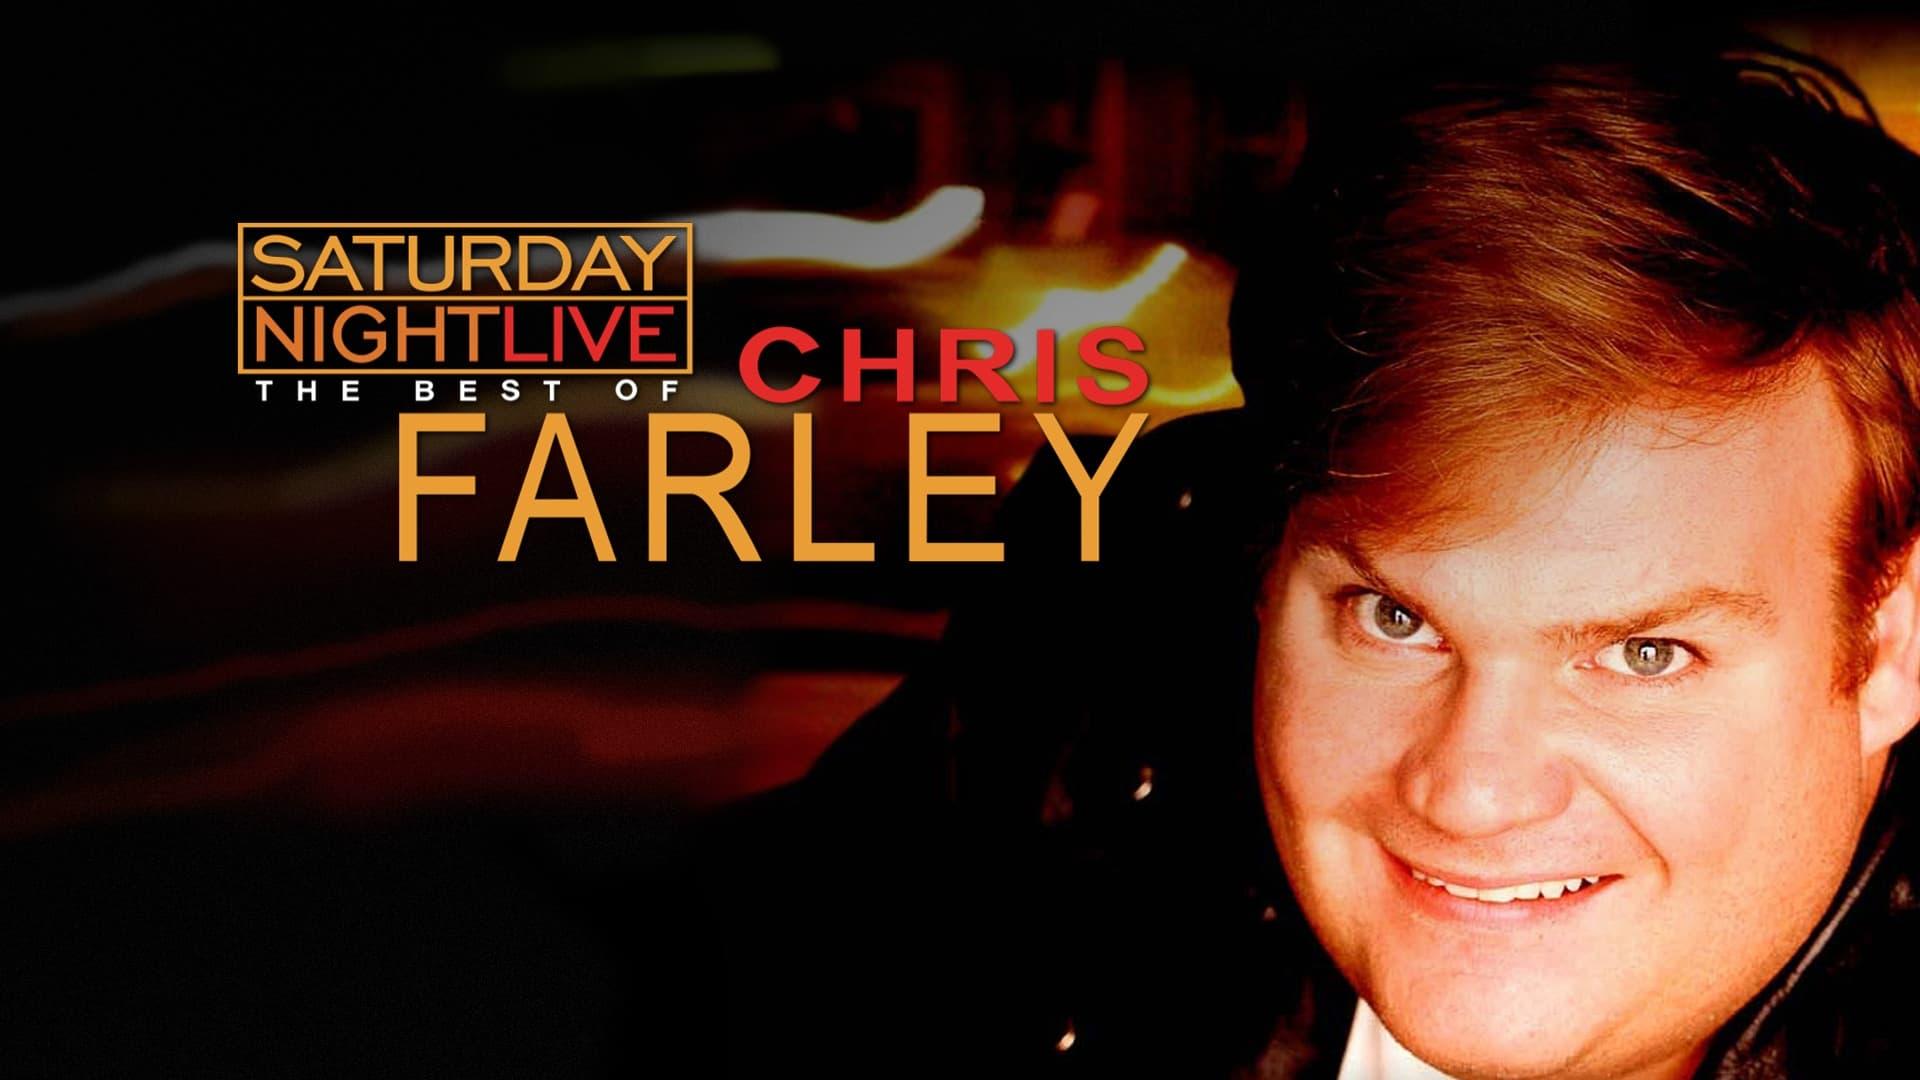 Saturday Night Live: The Best of Chris Farley backdrop